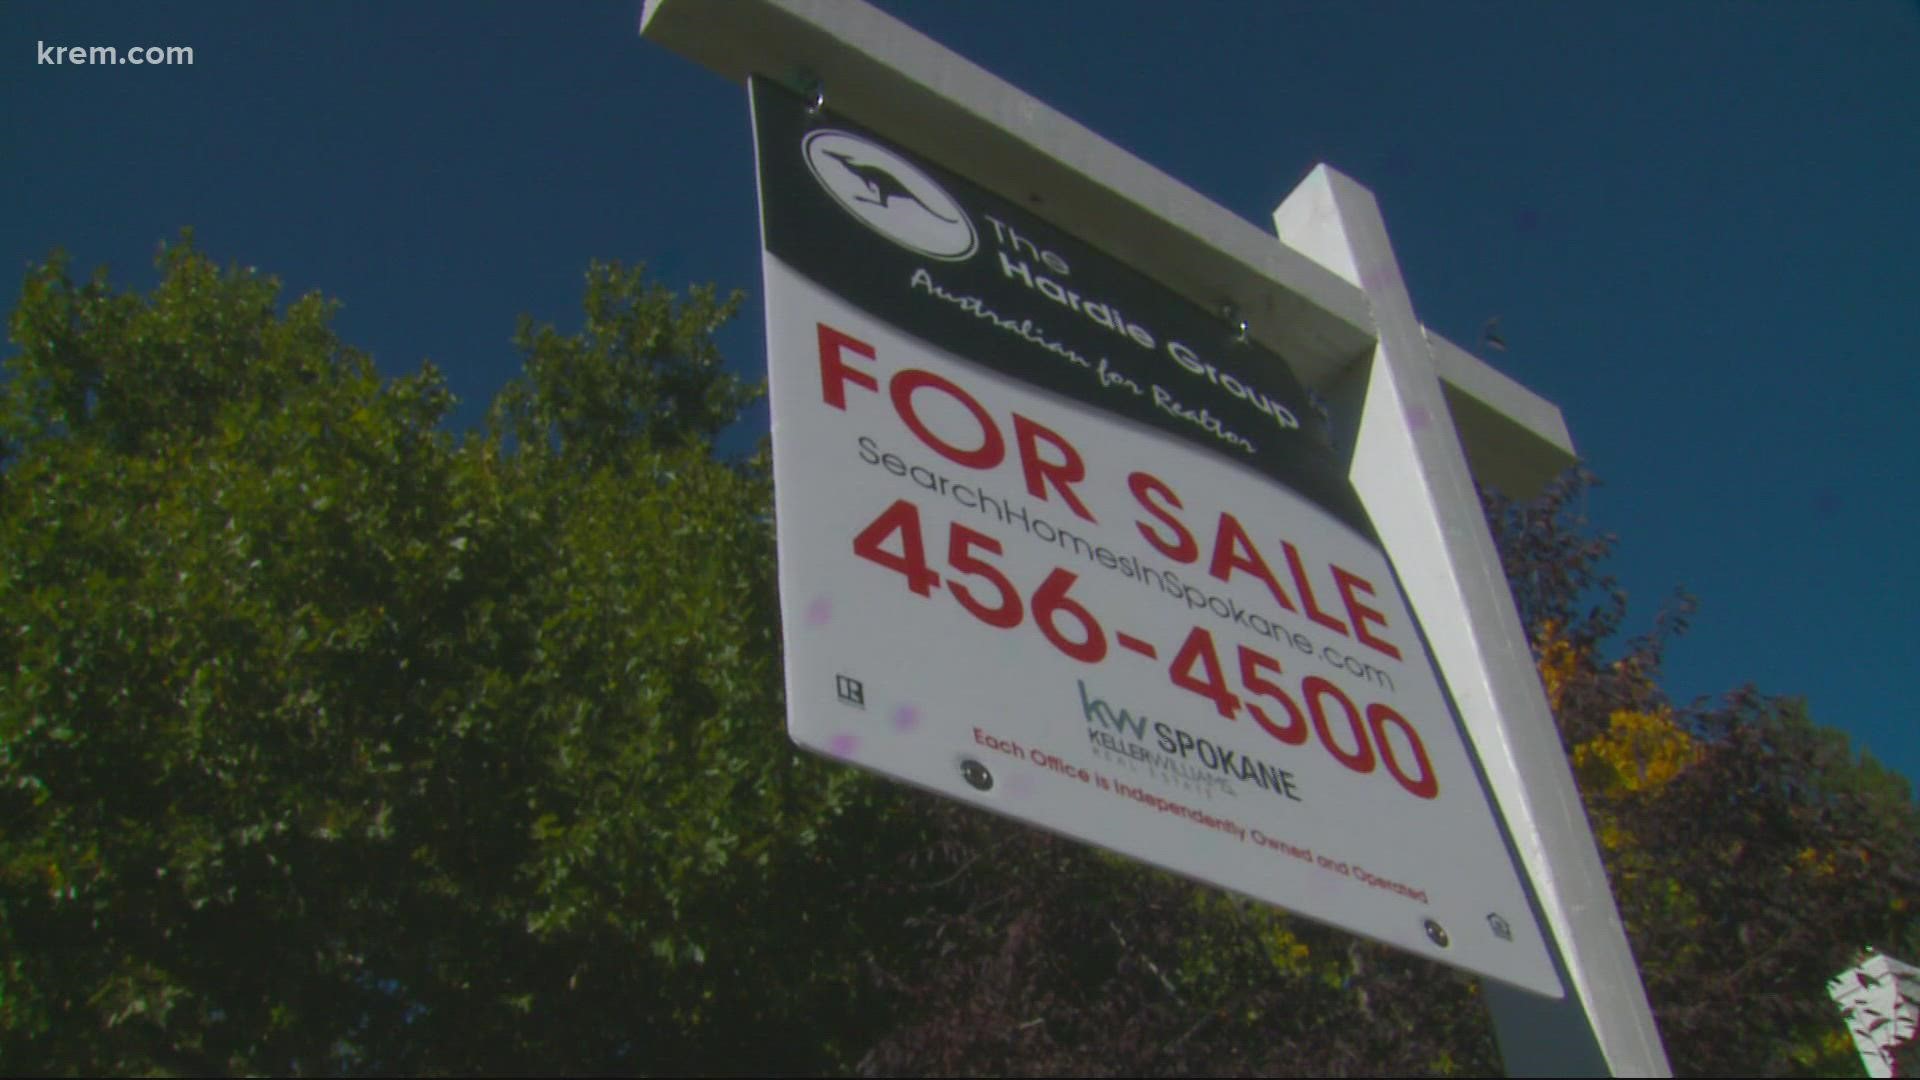 Local realtors say Spokane's housing market is starting to slow down slightly but prices are still higher than average.